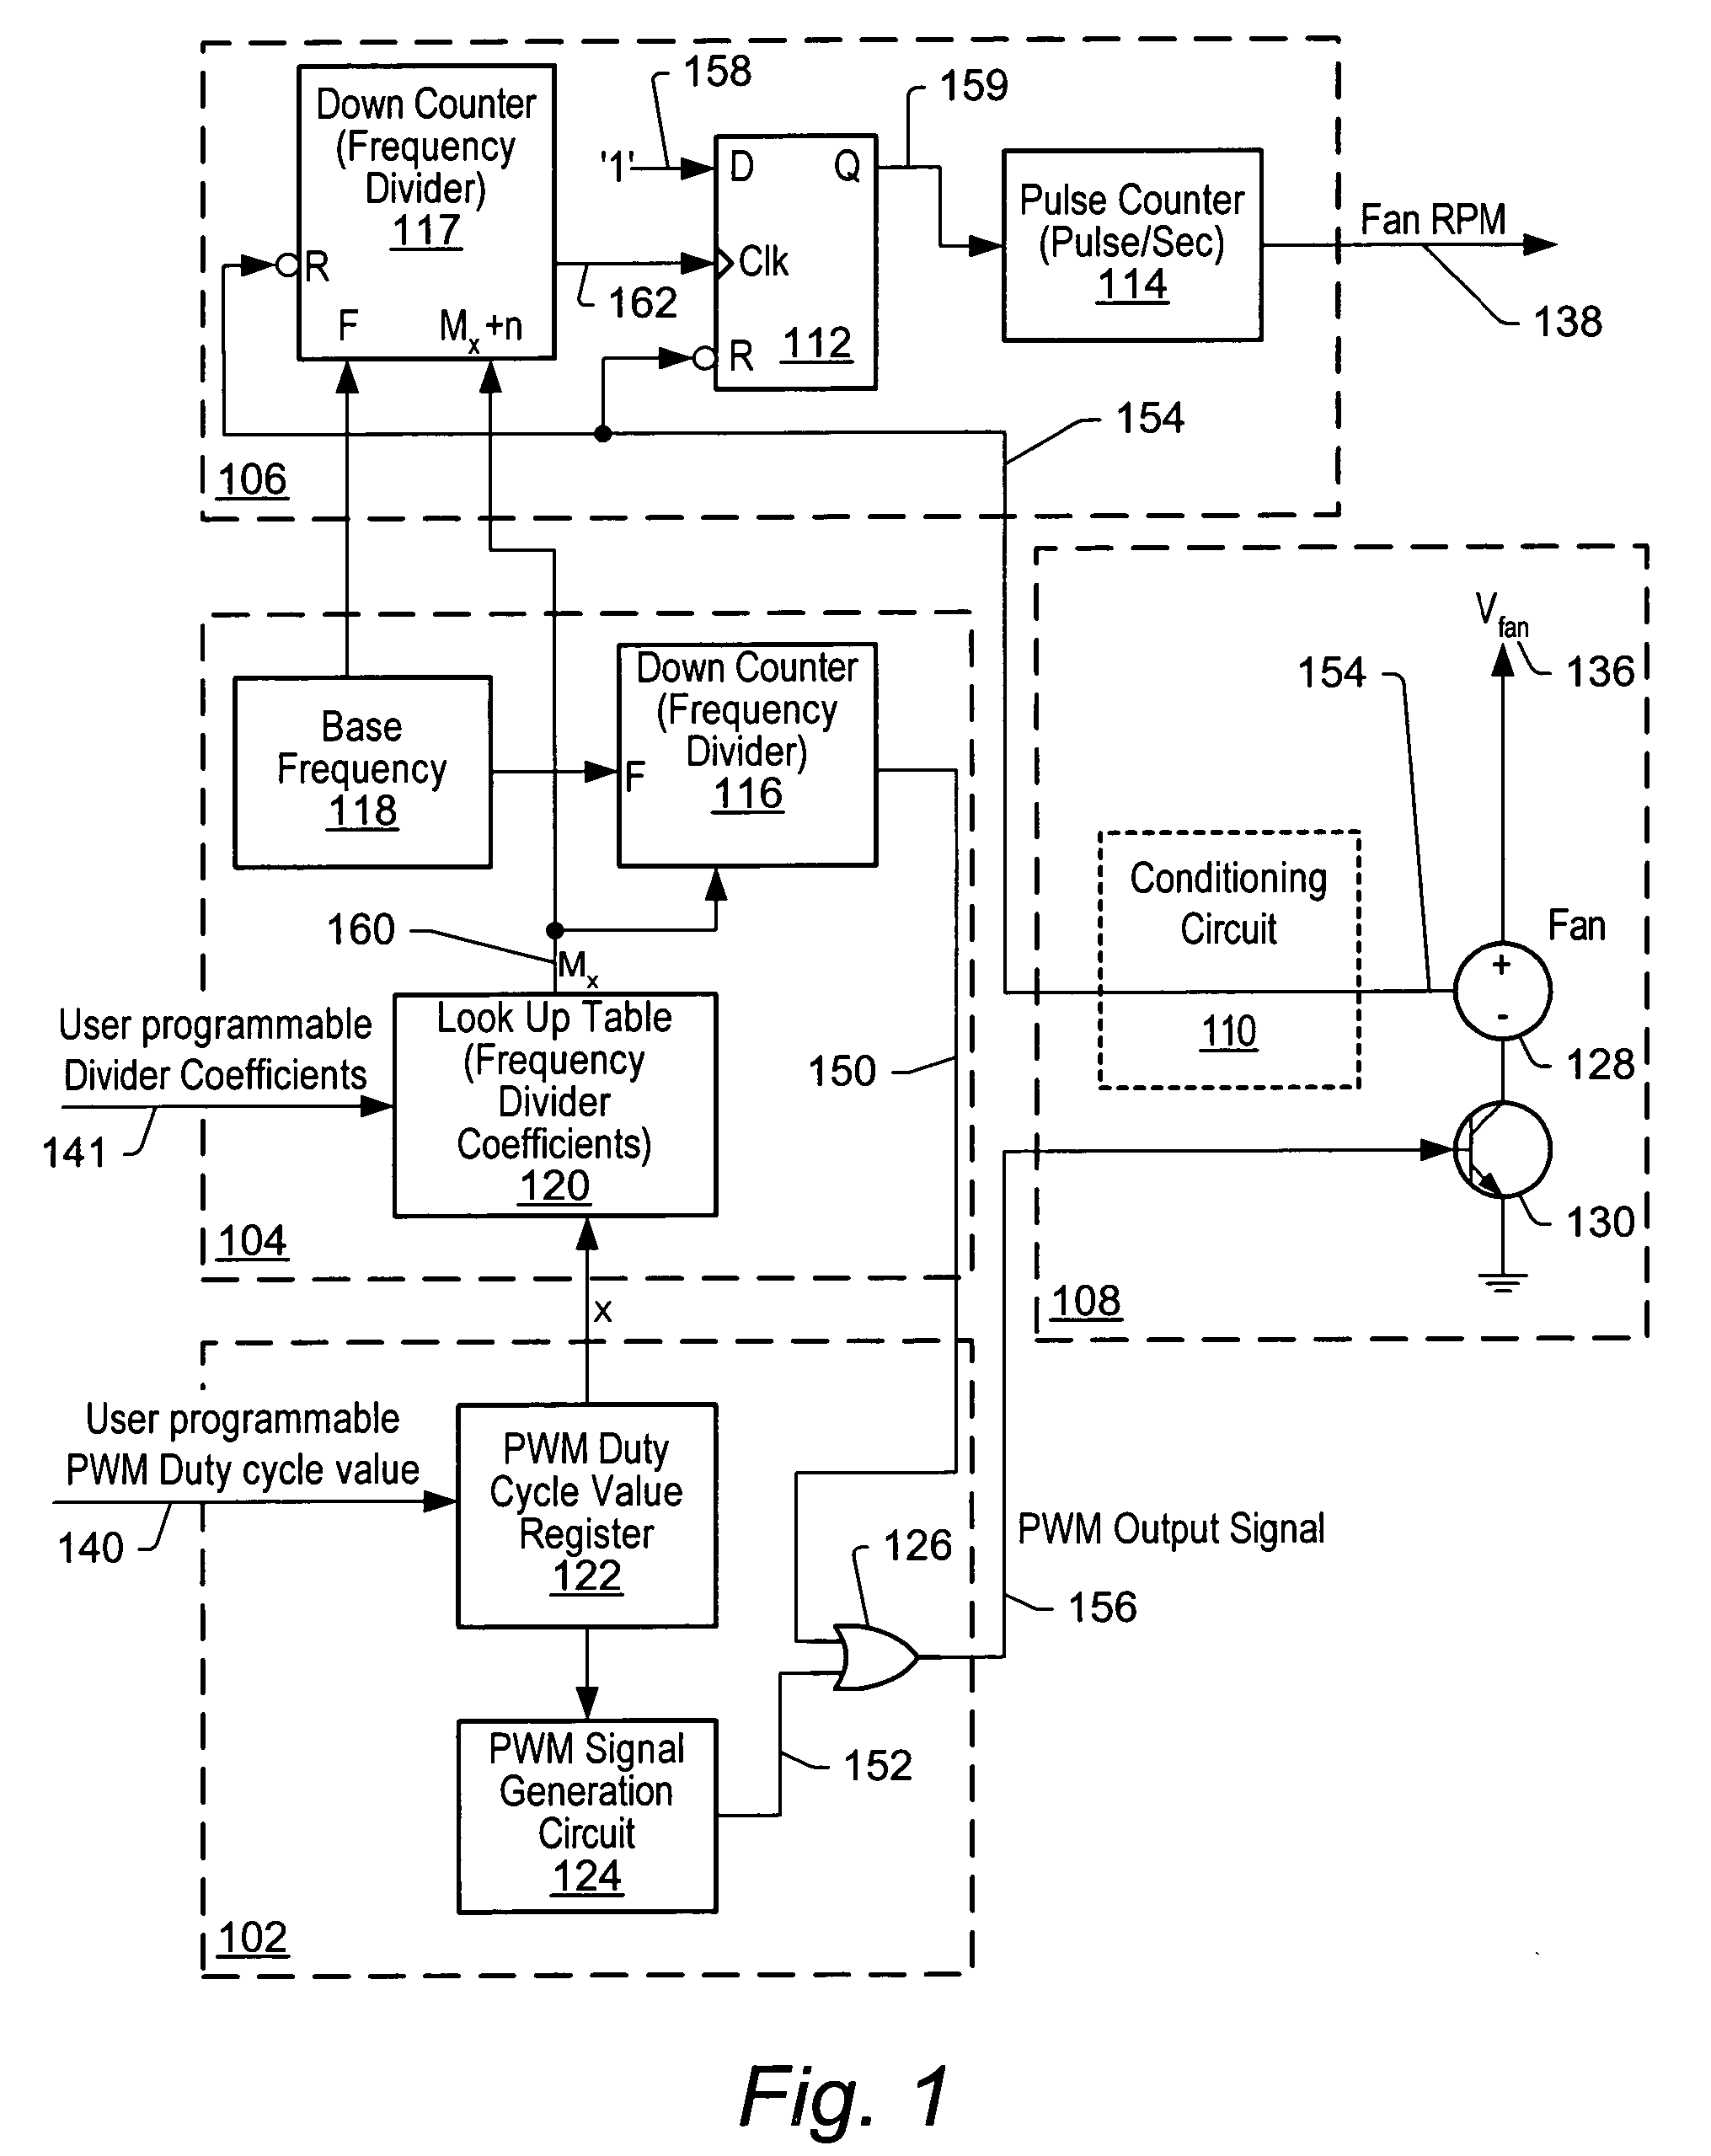 Method and apparatus to achieve accurate fan tachometer with programmable look-up table